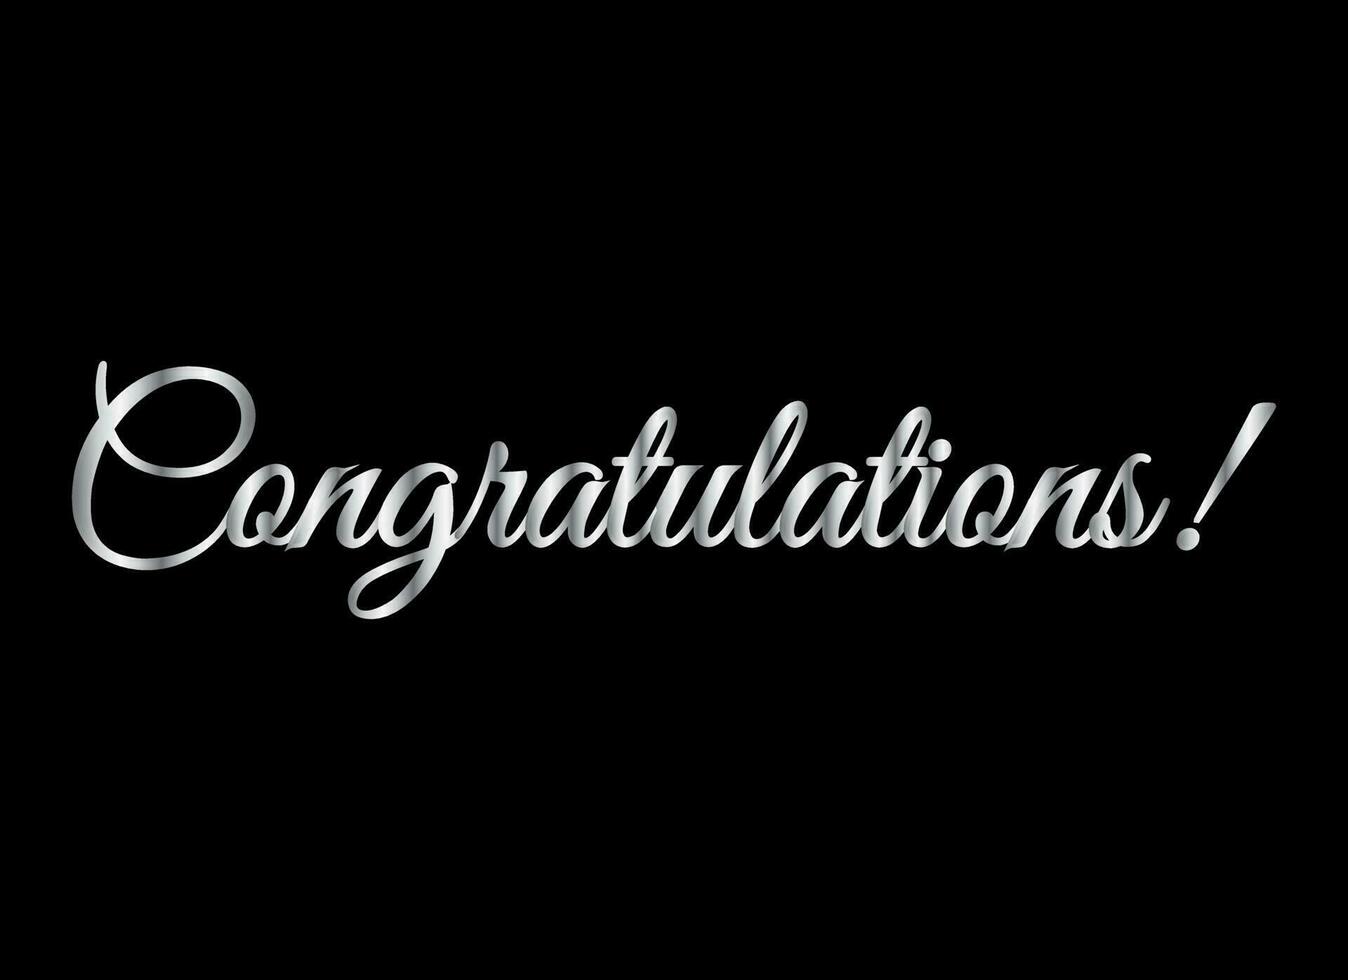 Congratulations Greeting. Congrats Text in Silver Color for a card, T-shirt printing, banner, poster typography Vector